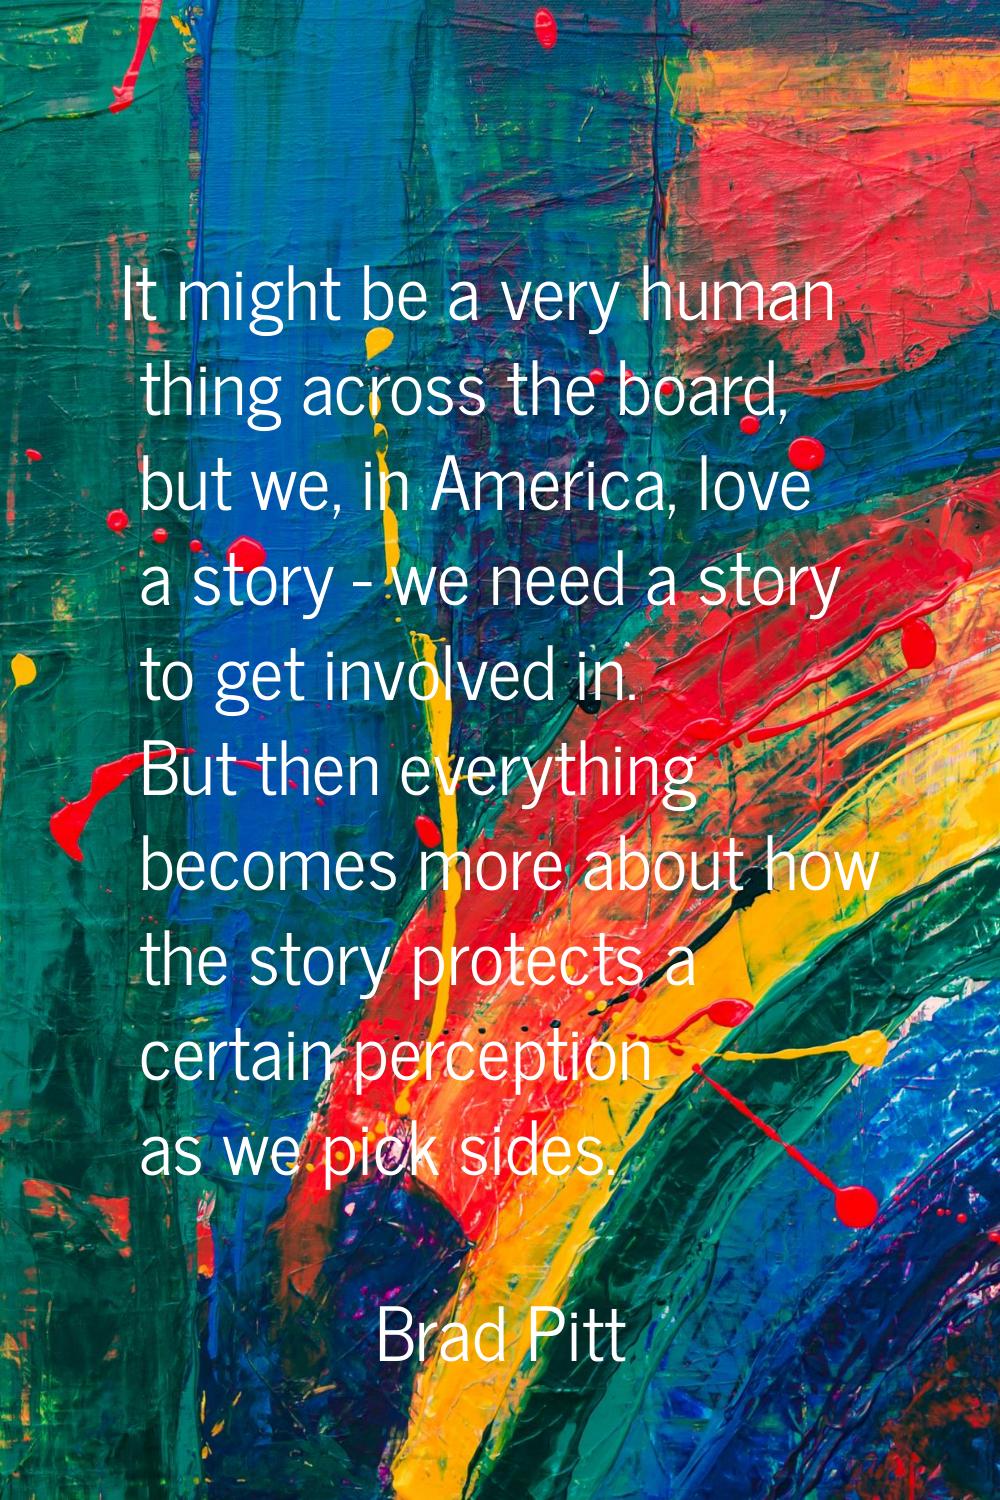 It might be a very human thing across the board, but we, in America, love a story - we need a story